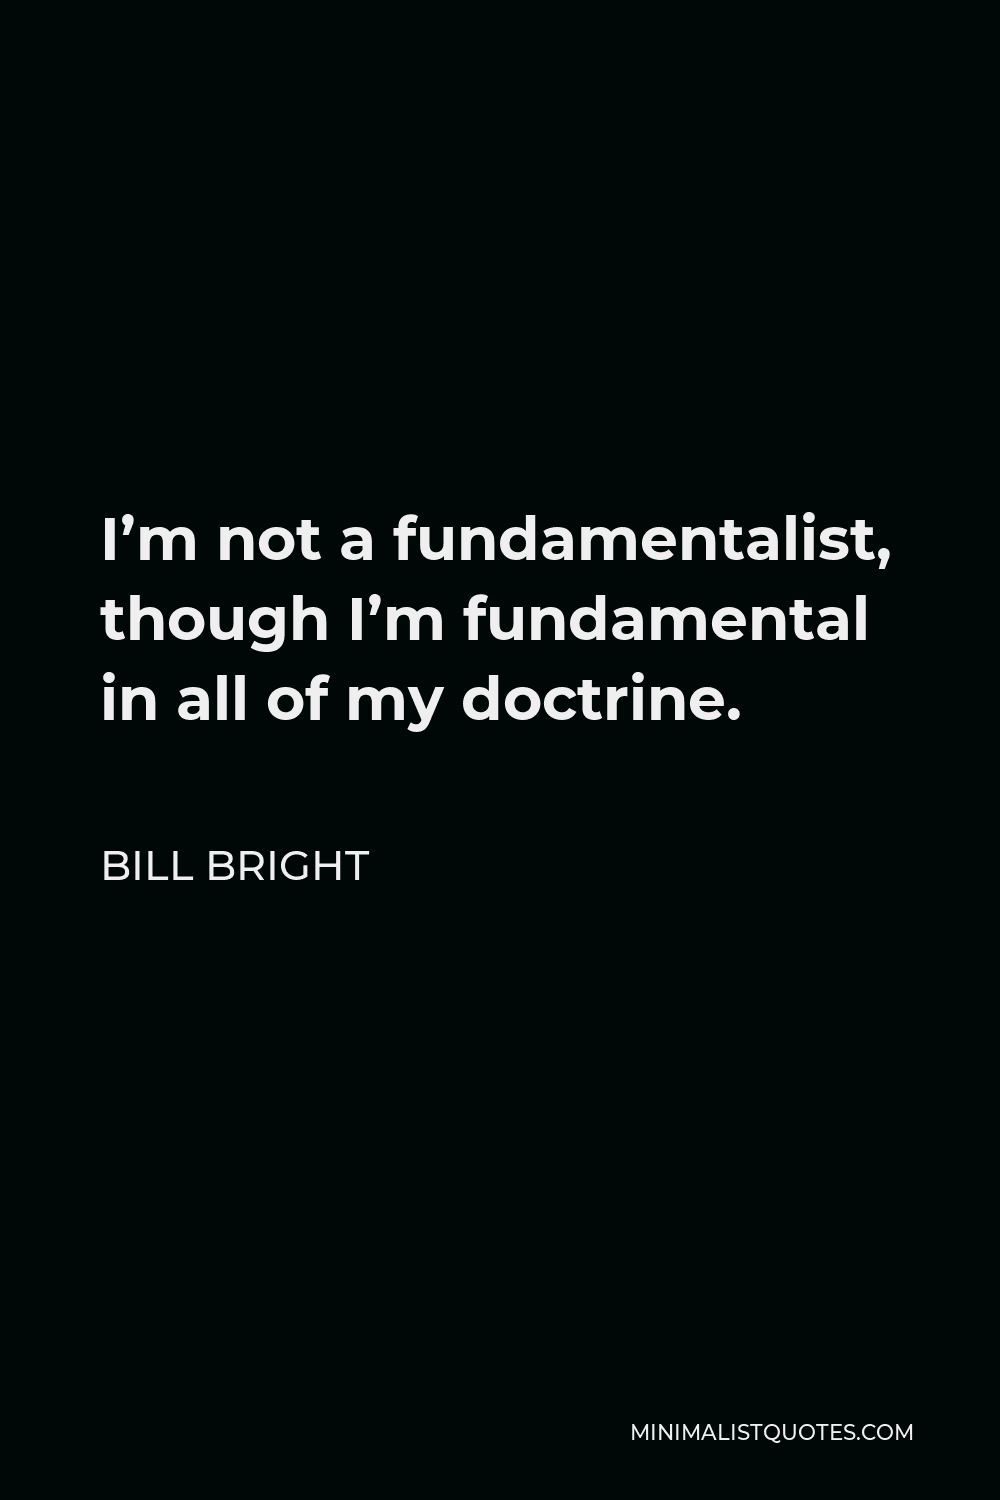 Bill Bright Quote - I’m not a fundamentalist, though I’m fundamental in all of my doctrine.